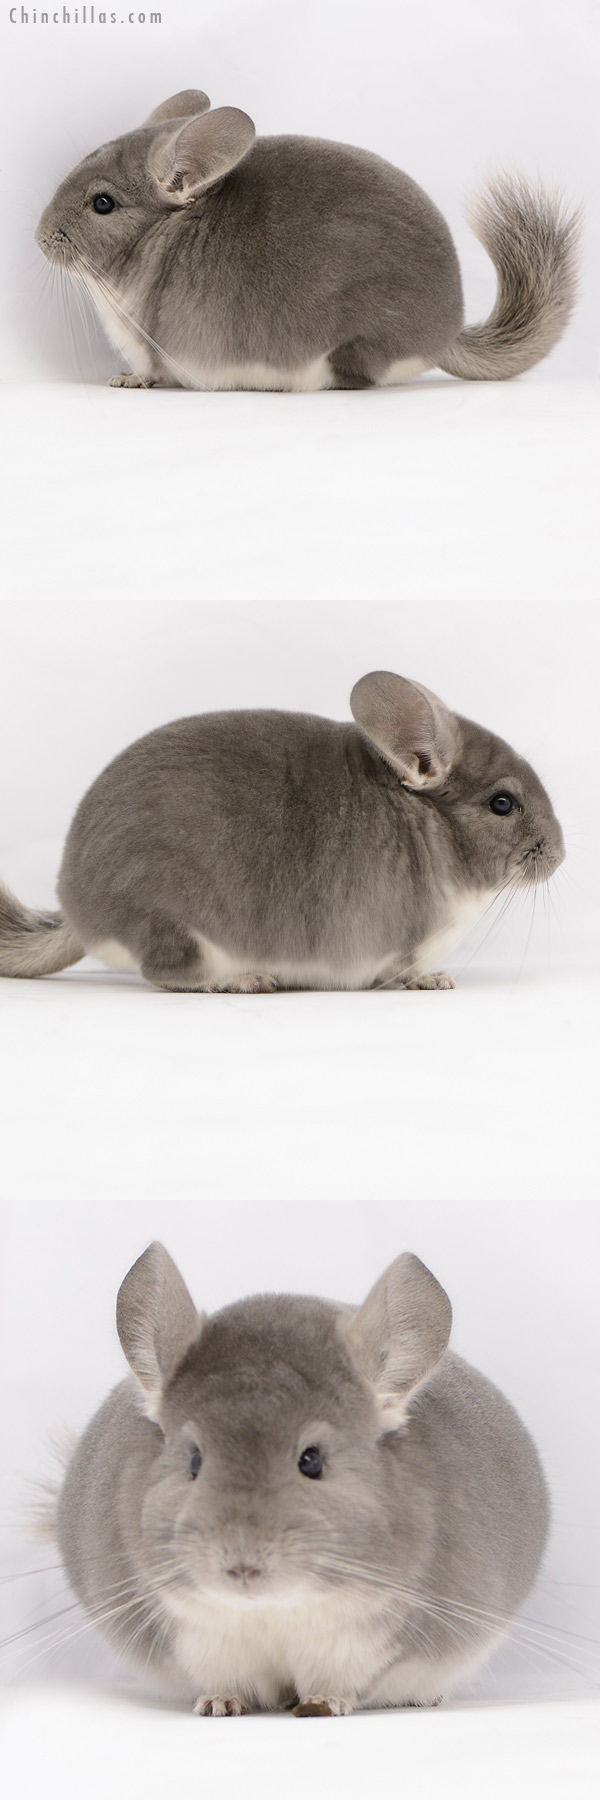 Chinchilla or related item offered for sale or export on Chinchillas.com - 20227 Herd Improvement Quality Violet Male Chinchilla